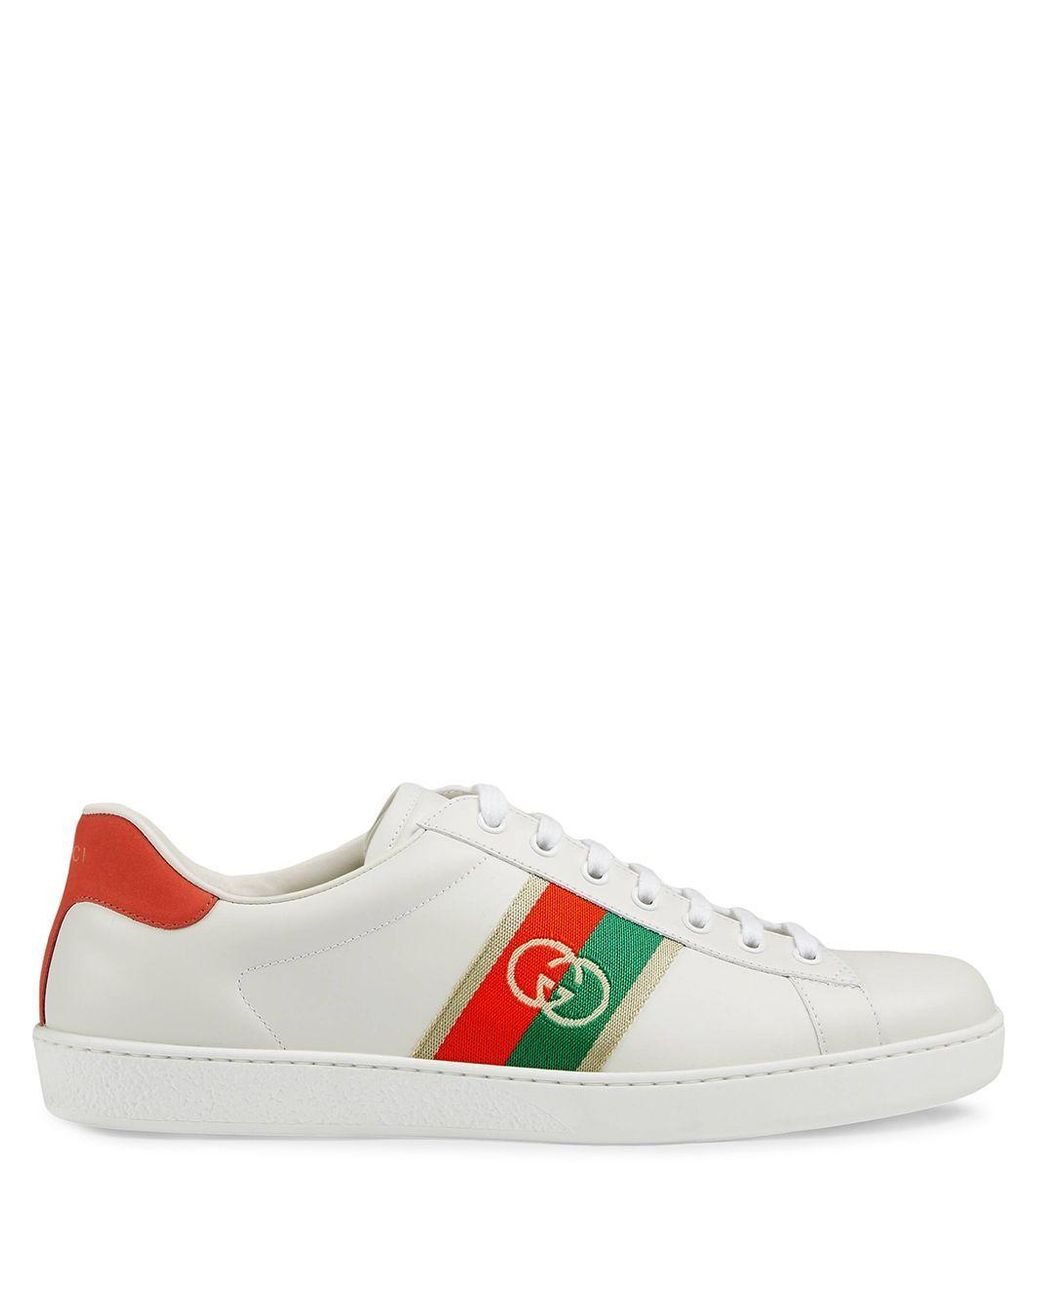 Gucci Leather Sneakers for Men - Lyst